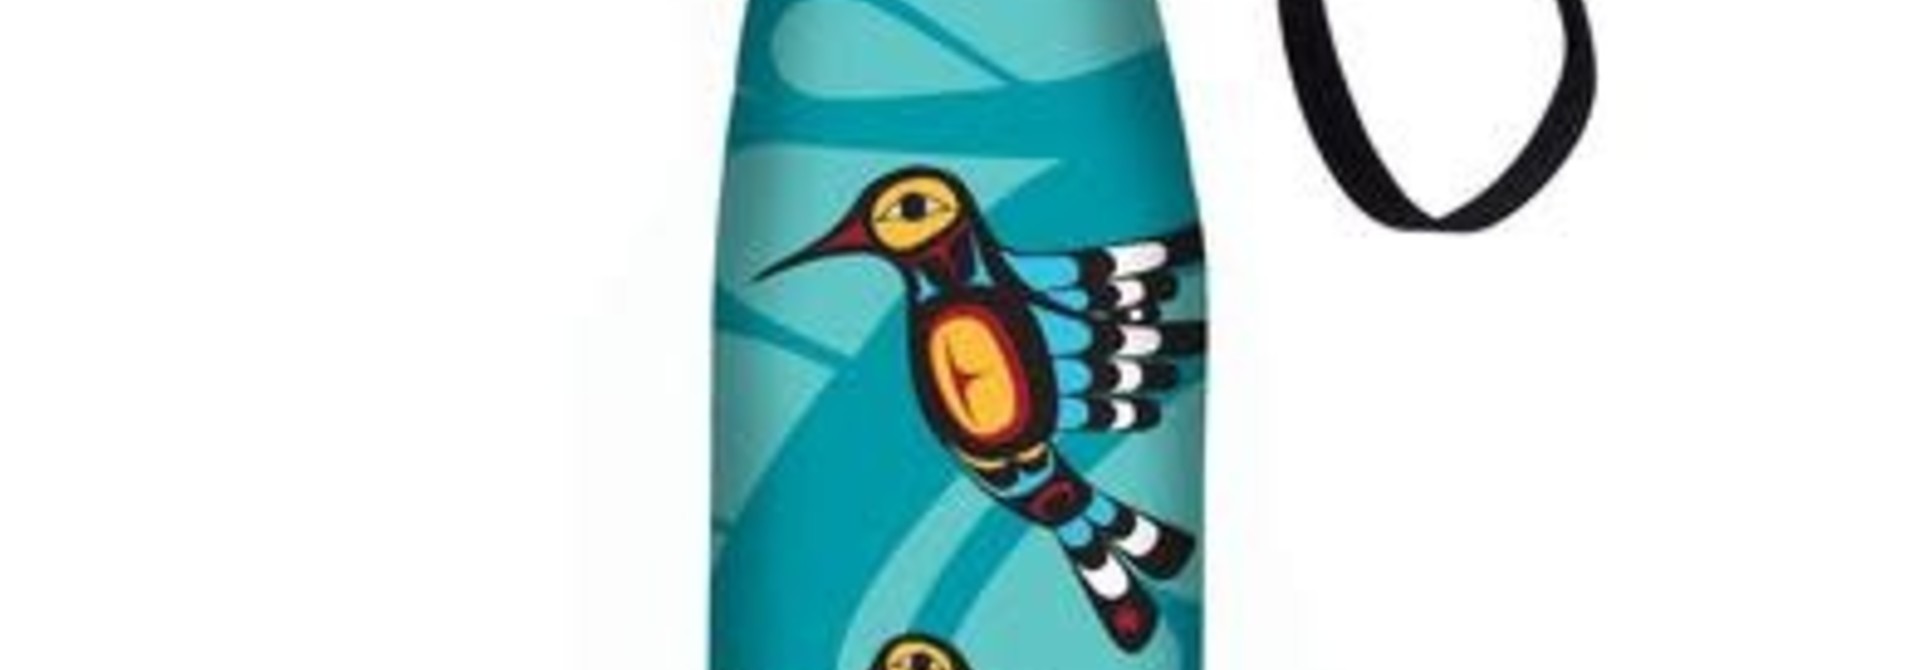 Insulated water bottle- Hummingbirds by Francis Dick